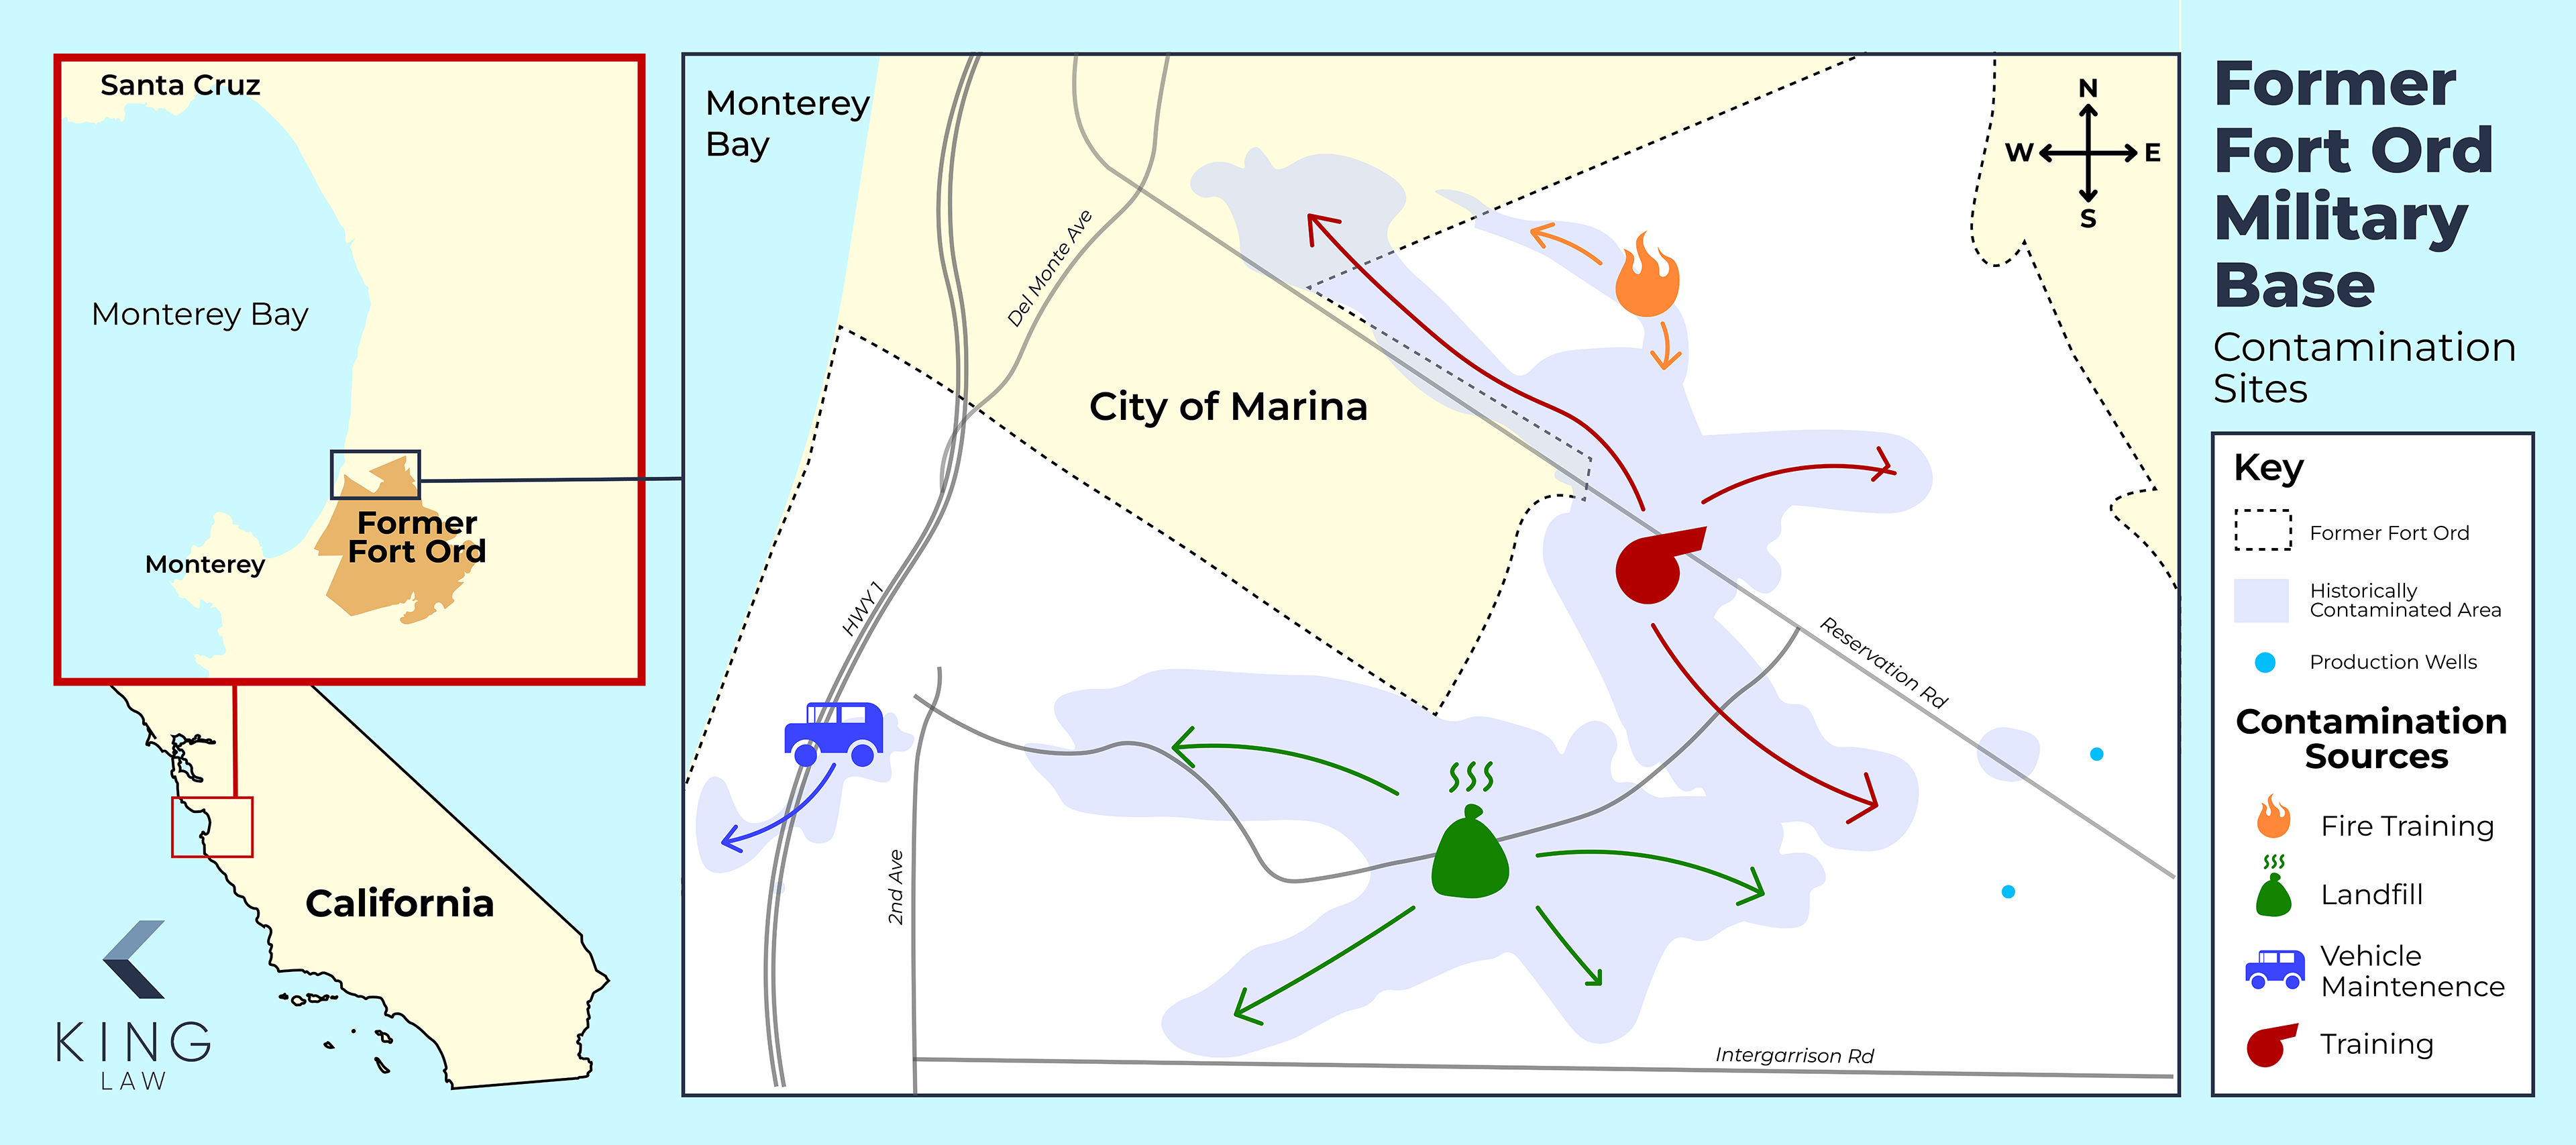 Fort Ord Water Contamination Map: Infographic shows map of Fort Ord with sources of contamination and the affected areas.